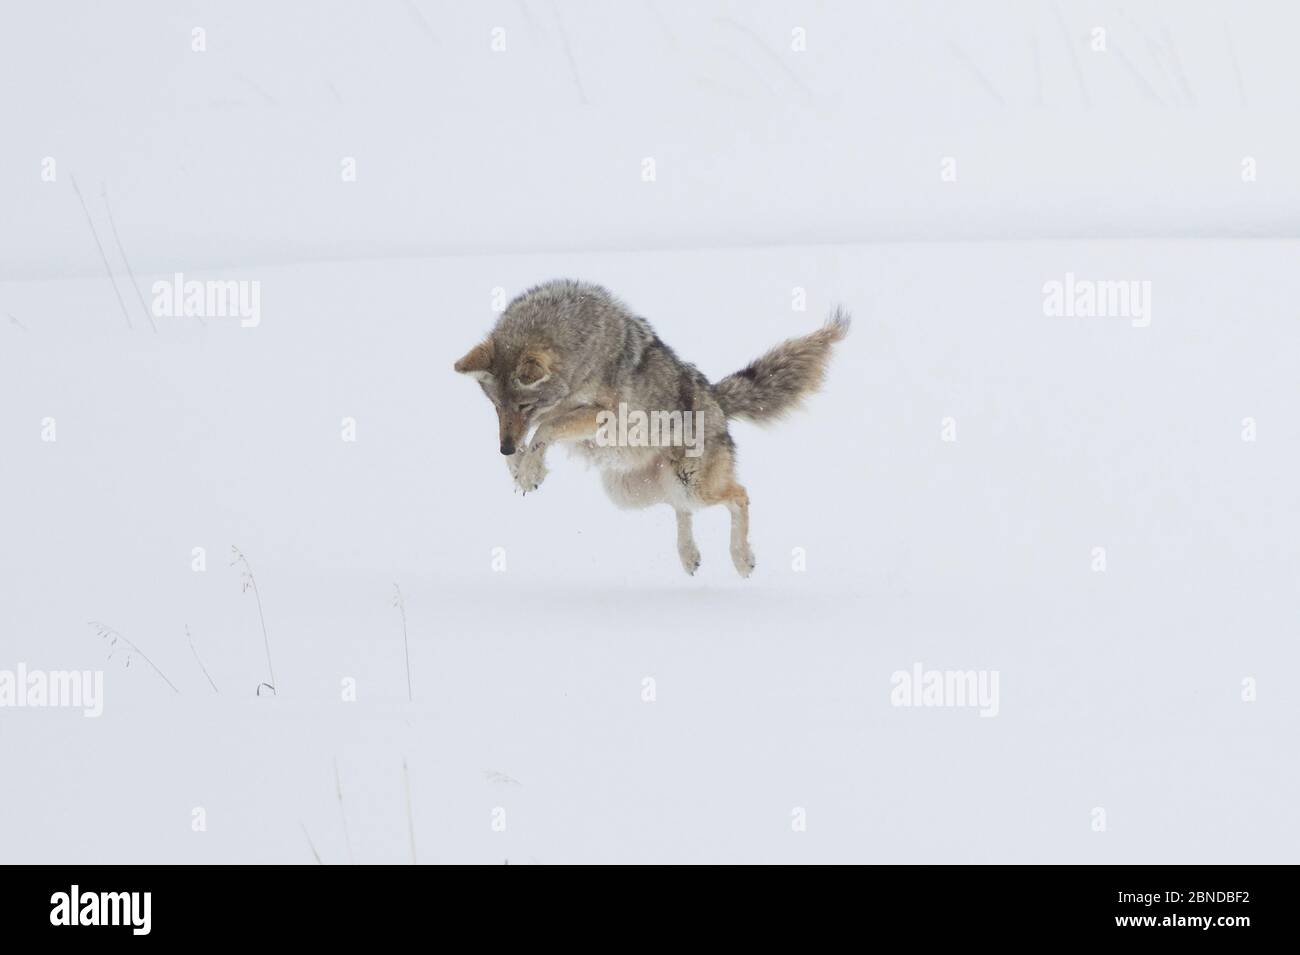 Coyote (Canis latrans) hunting - jumping in snow, Yellowstone National Park, Wyoming, USA, February. Stock Photo